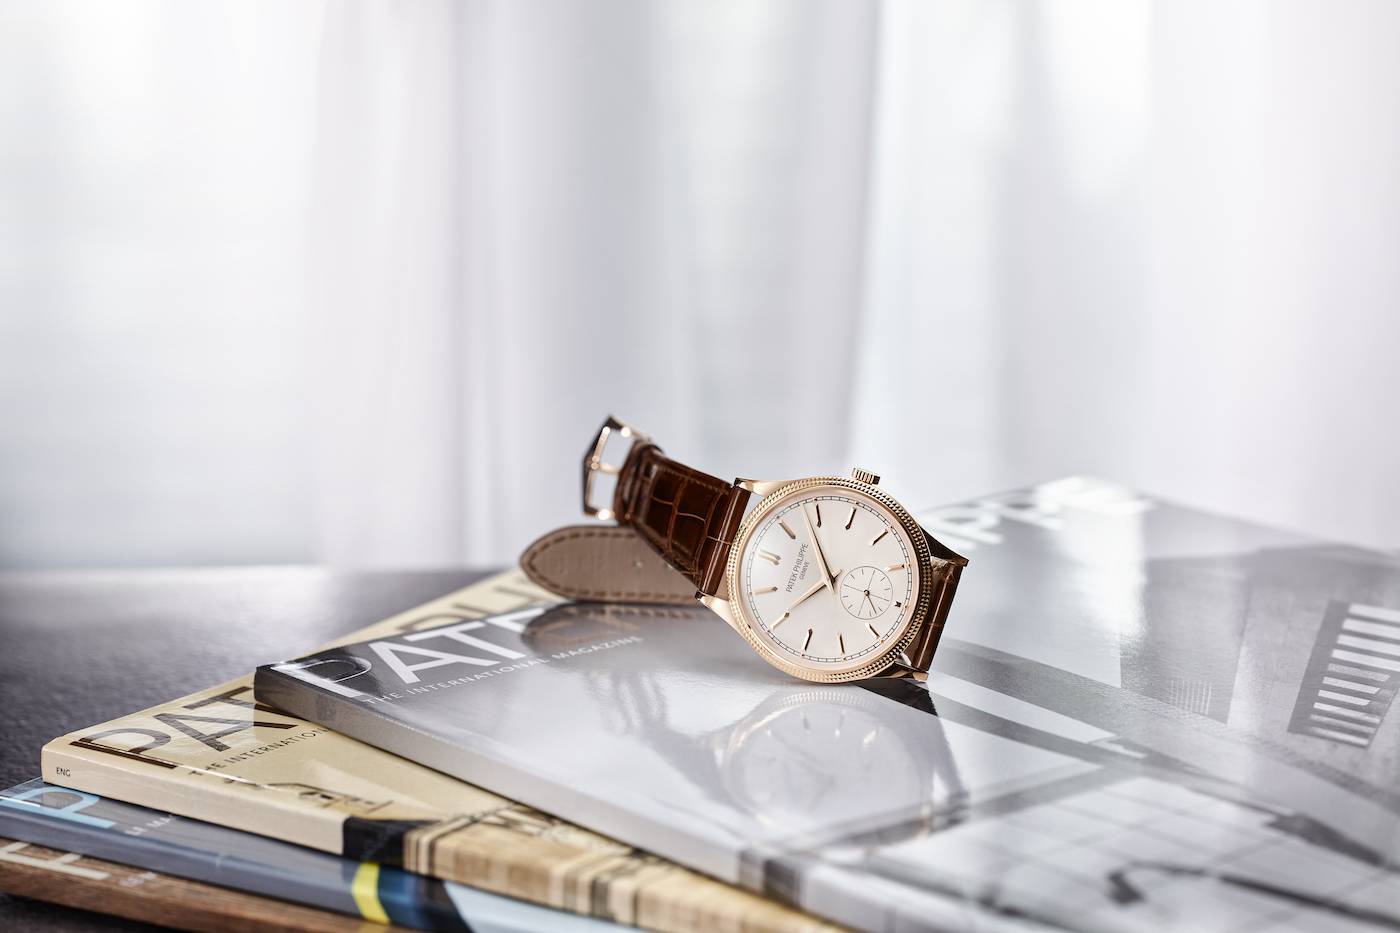 Patek Philippe's most contemporary Calatrava comes in two versions: the Ref. 6119R-001 (pictured here) combines a rose-gold case with a silvery grained dial as well as applied hour markers and hands in rose gold. The Ref. 6119G-001 in white gold subtly plays with light on a charcoal gray dial with attractive contrasts – a vertical satin finish interrupted by the snailed subsidiary seconds dial.